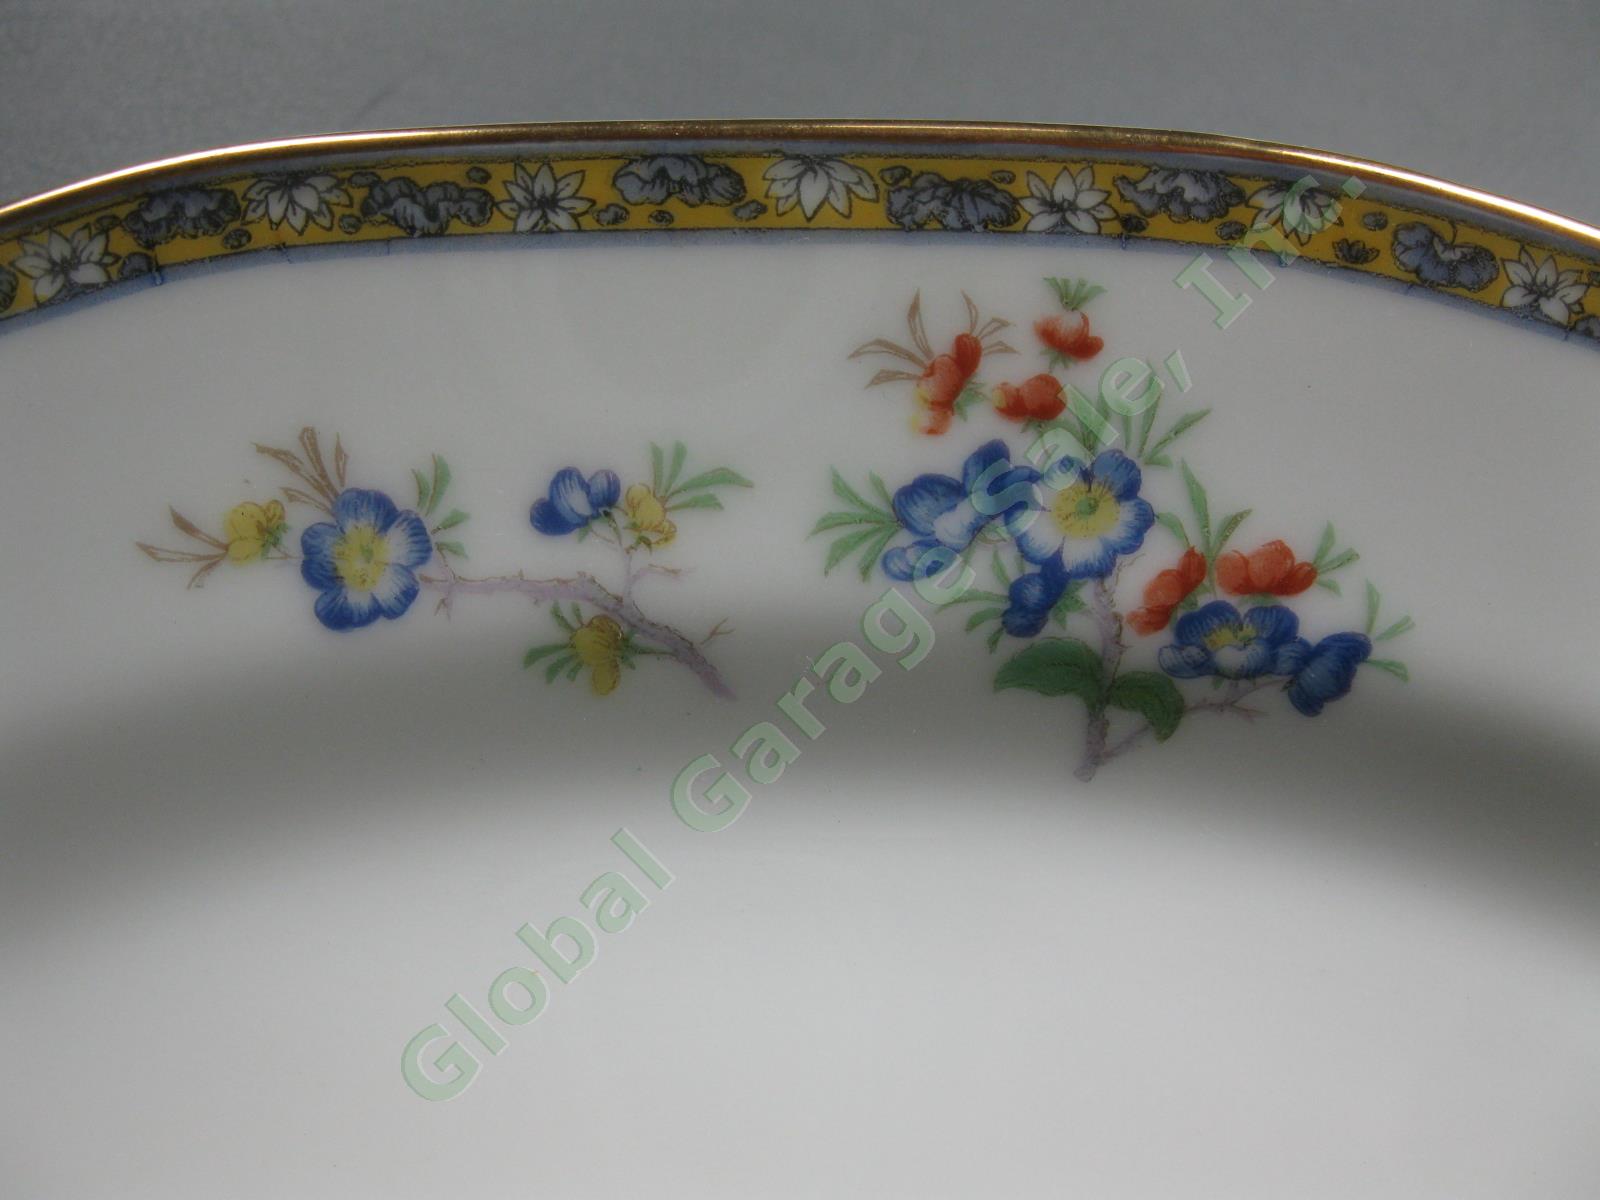 Theodore Haviland Montreux Mongolia 13" Oval Serving Platter Floral Tray Limoges 2